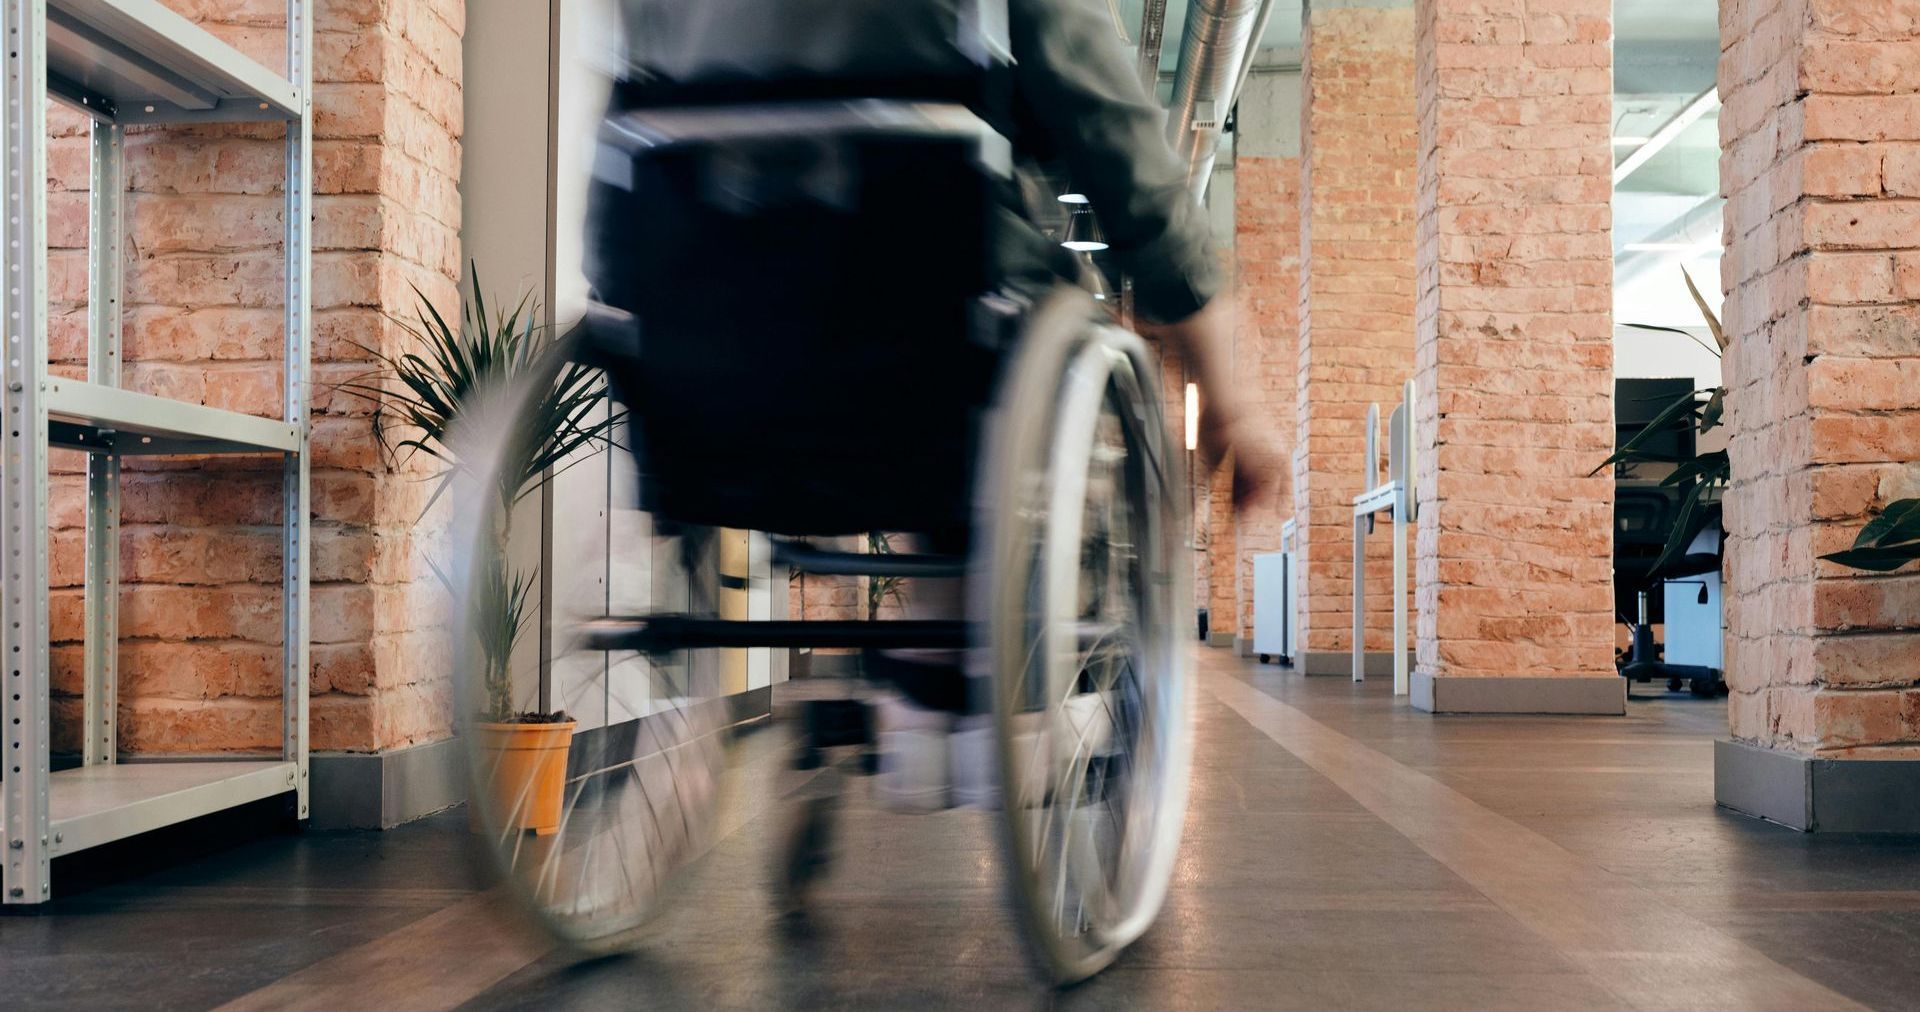 A person in a wheelchair is walking down a hallway.